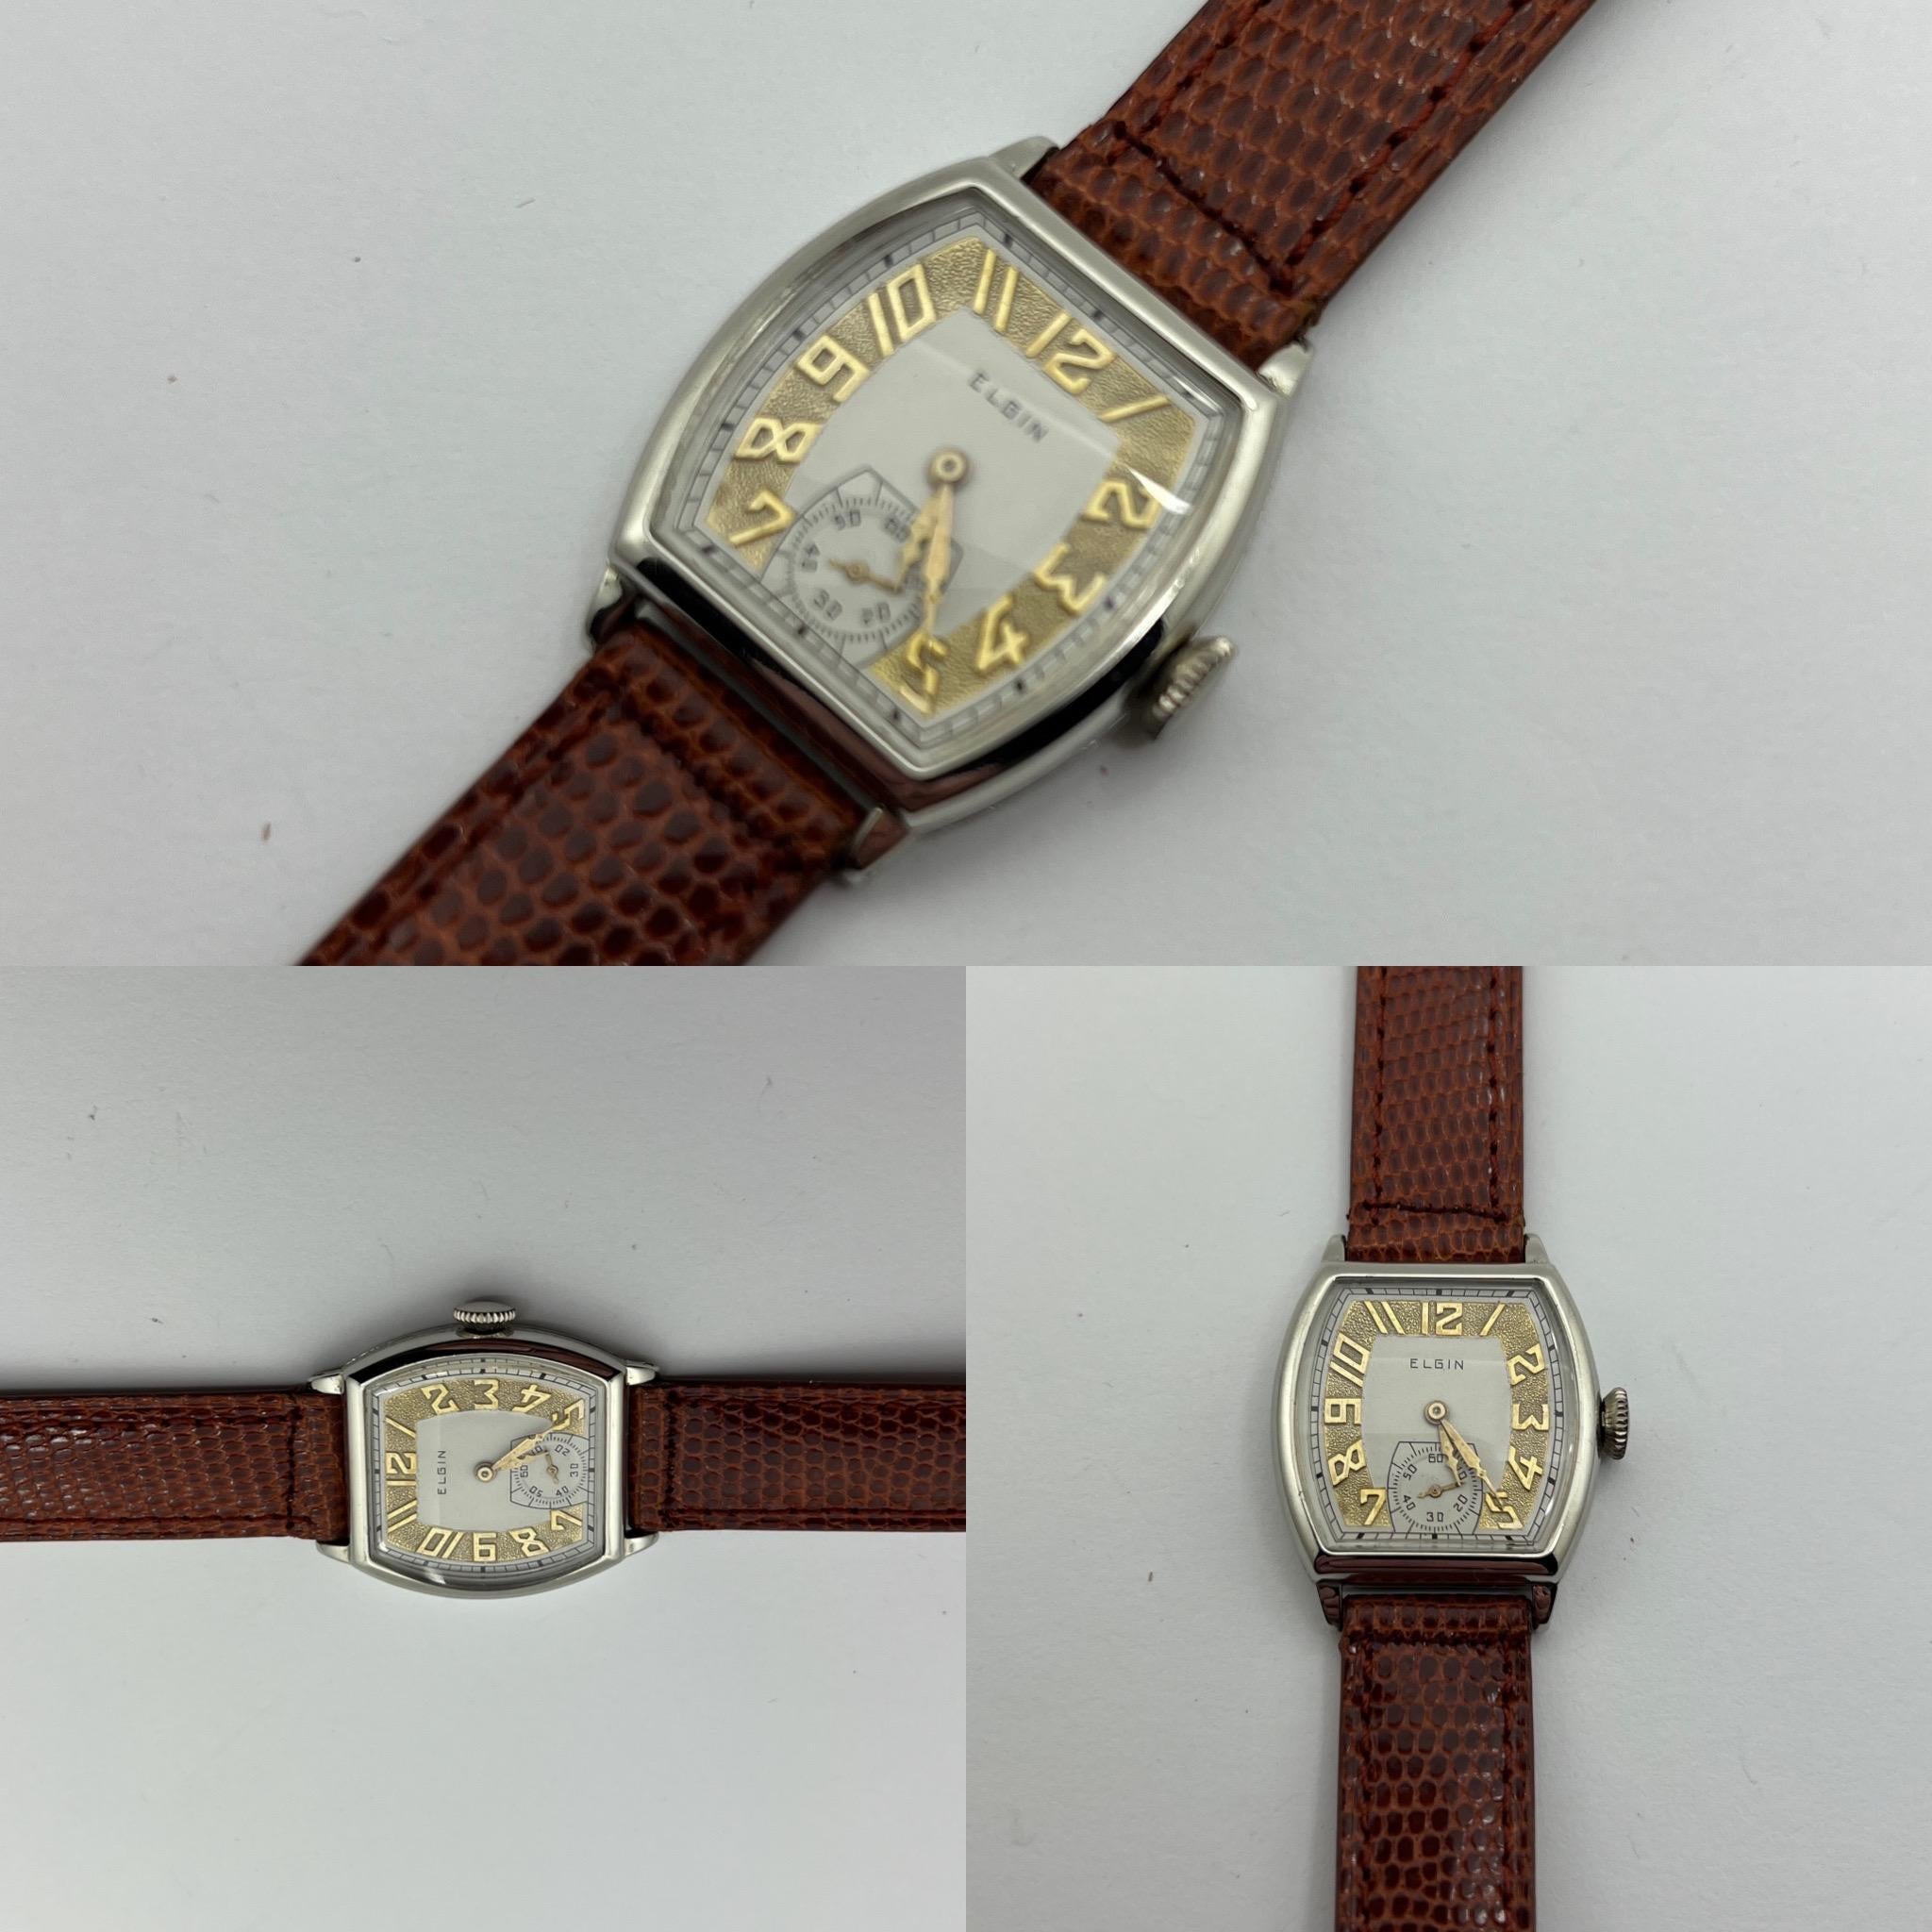 Solid Gold 1930 Elgin Art Deco Watch with a Chased Bezel Restored 6